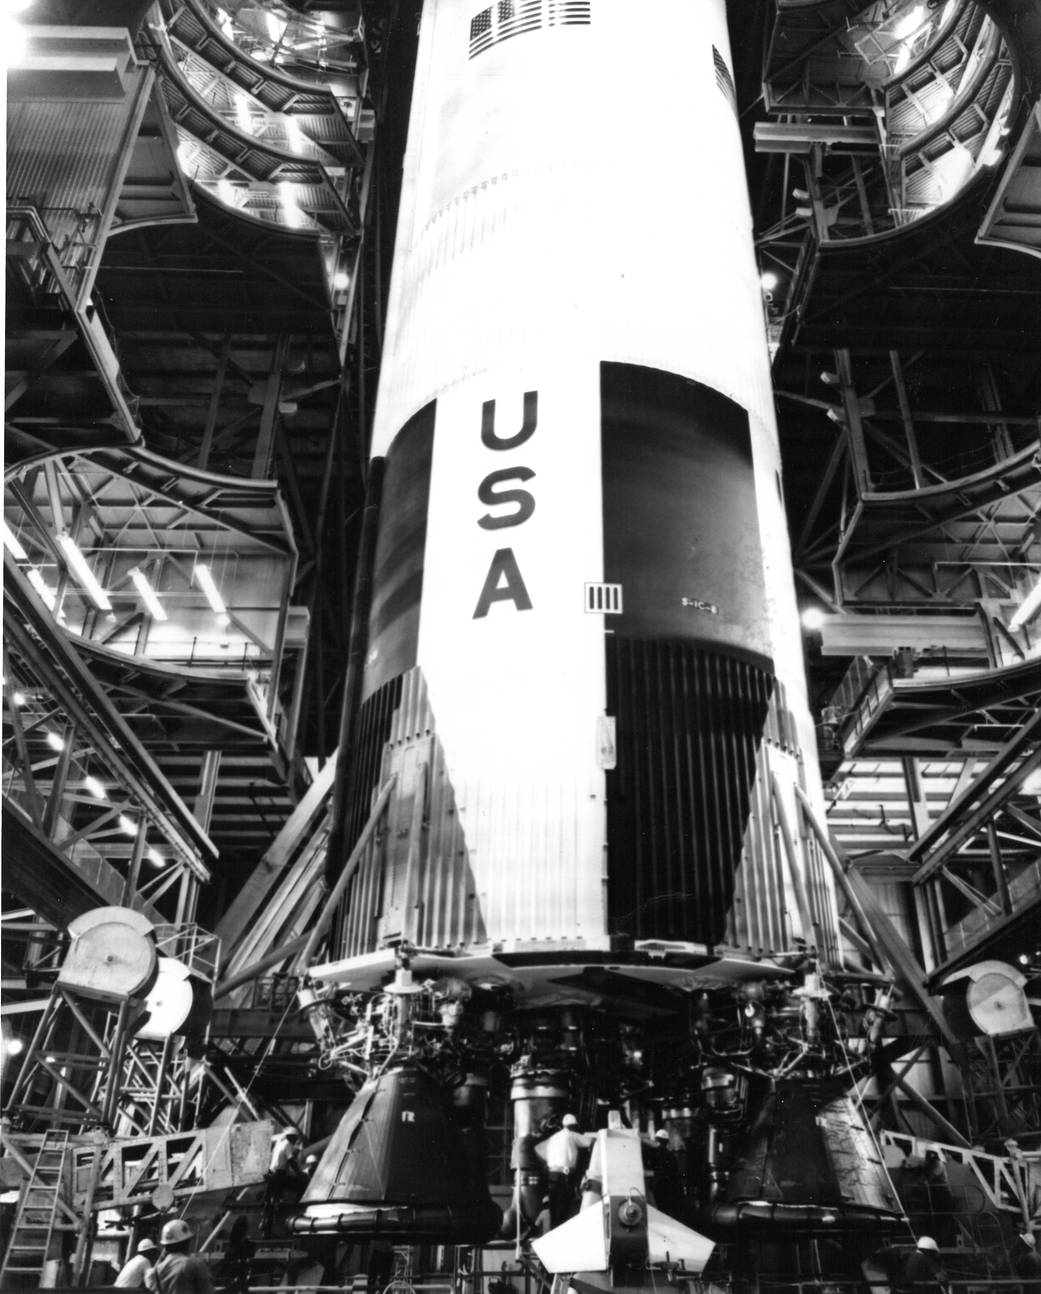 Black and White Photograph of a Saturn V